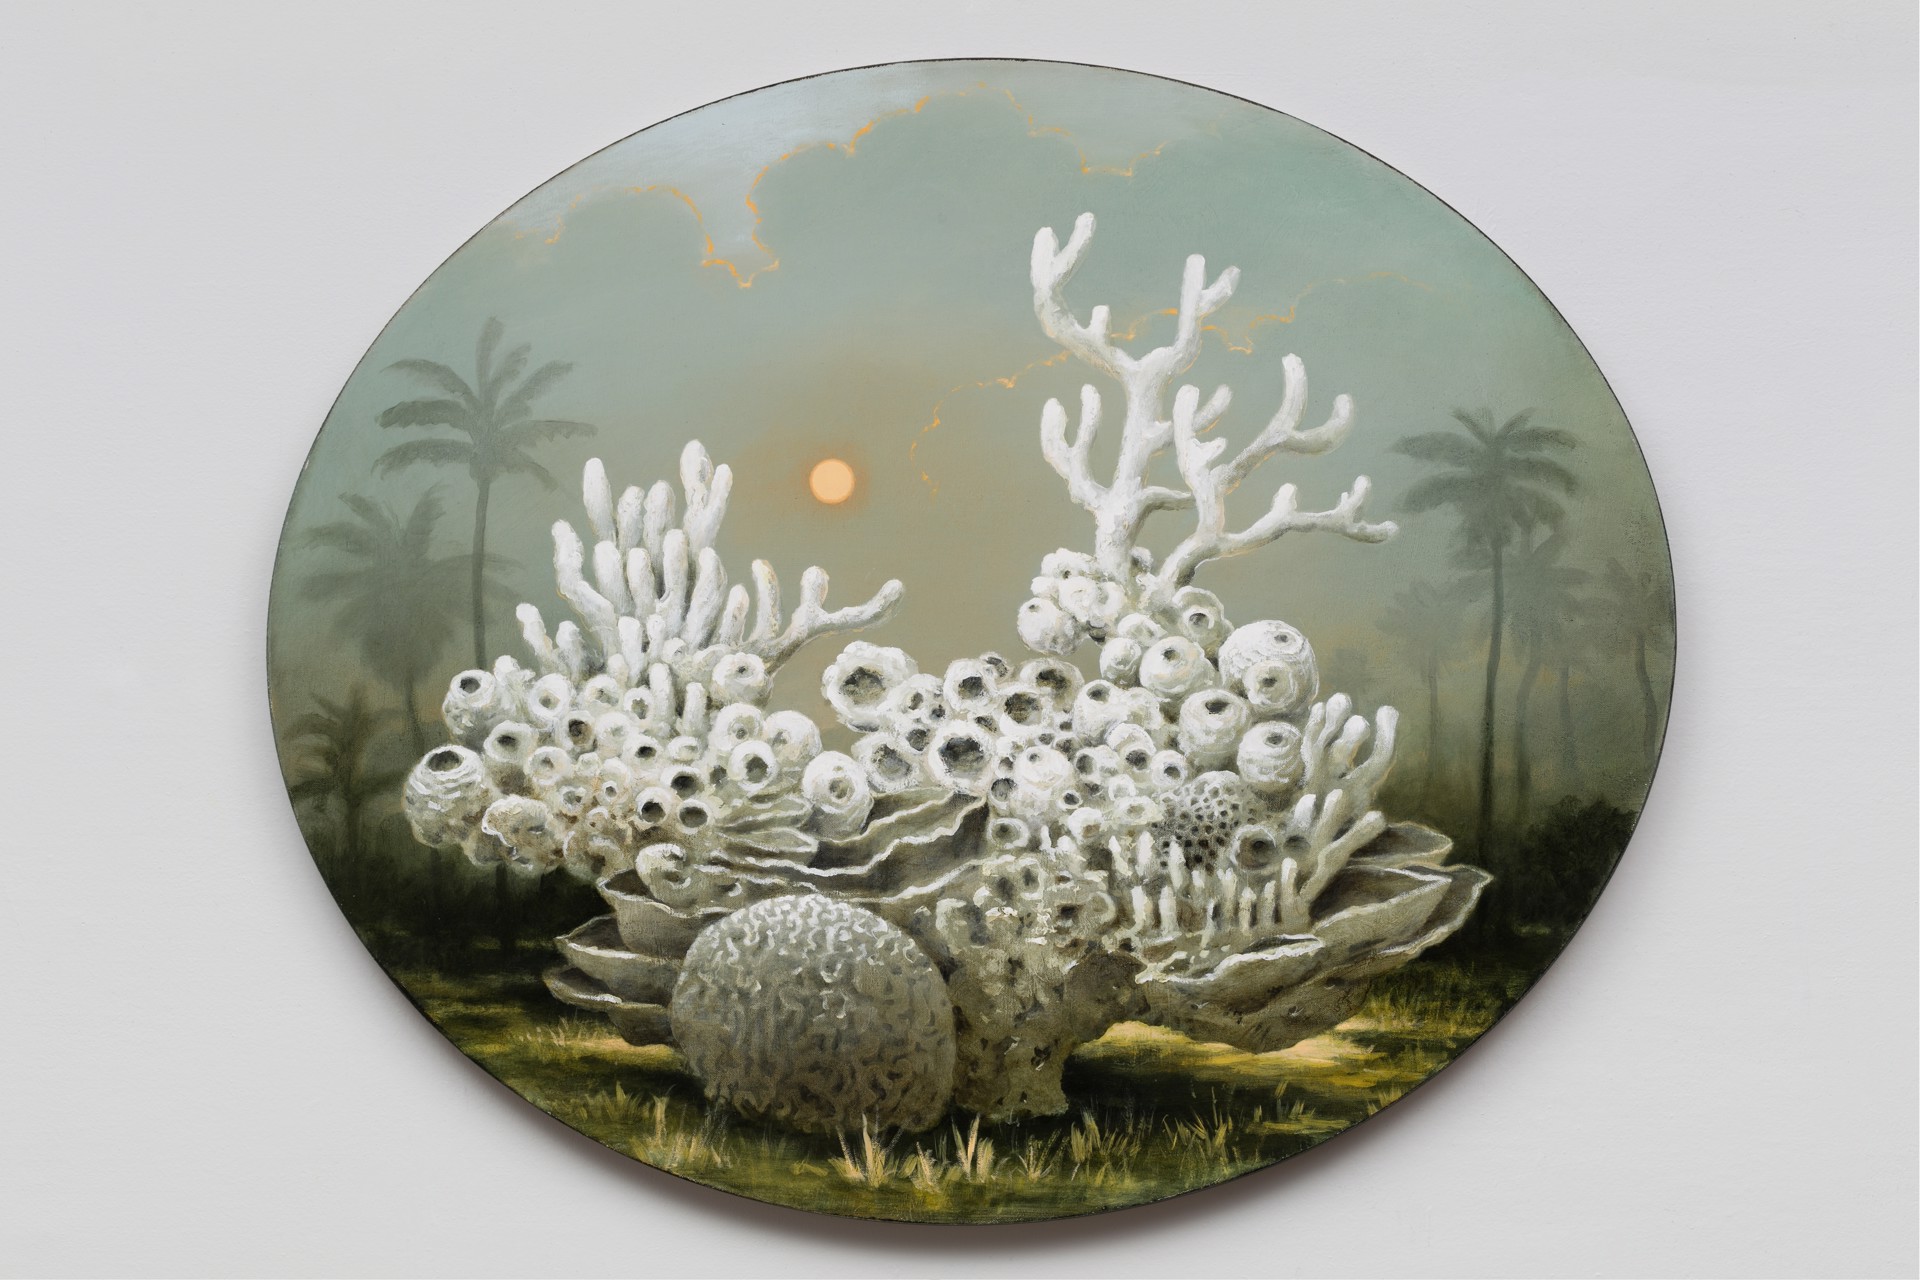 The Reef by Kevin Sloan